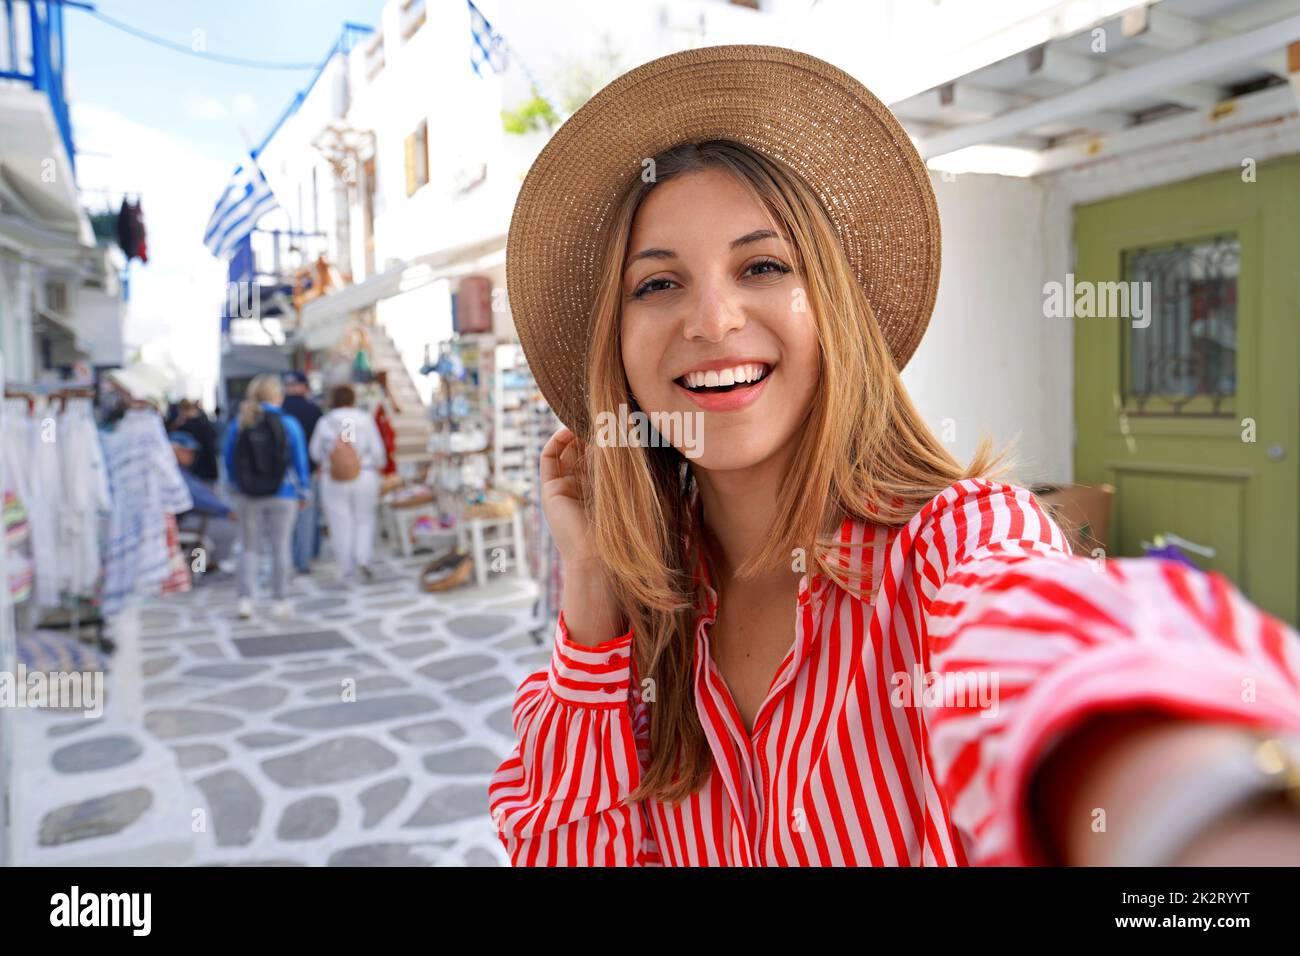 Self portrait of young woman with white smile strolling in Mykonos, Greece Stock Photo